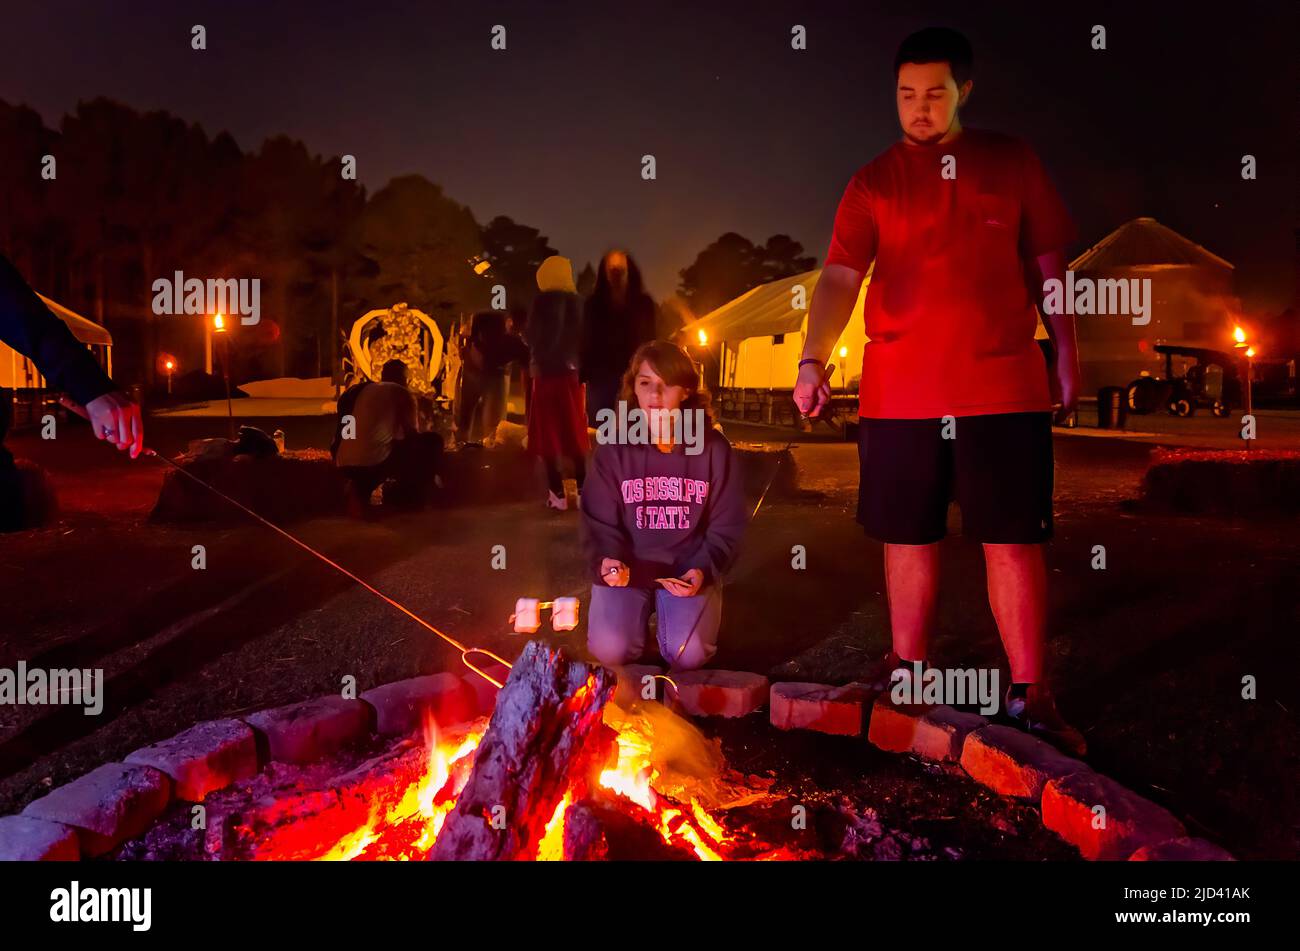 People toast s’mores over a bonfire, Sept. 25, 2012, in Caledonia, Mississippi. S’mores are a popular campfire treat. Stock Photo